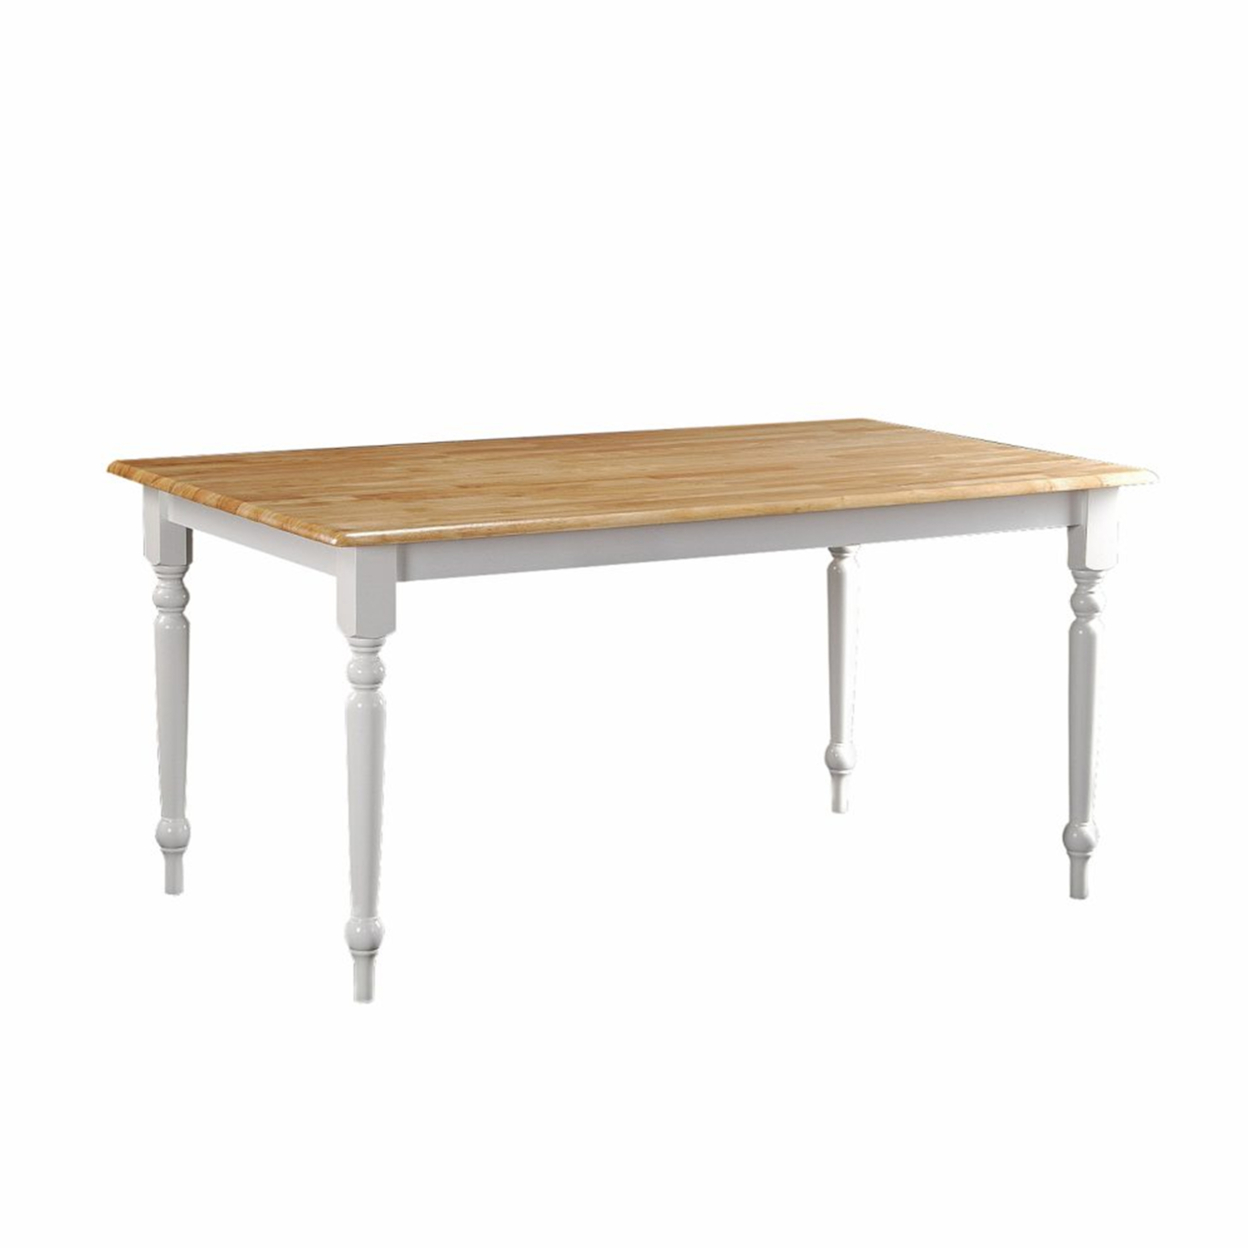 Grained Rectangular Wooden Dining Table With Turned Legs, Brown And White- Saltoro Sherpi